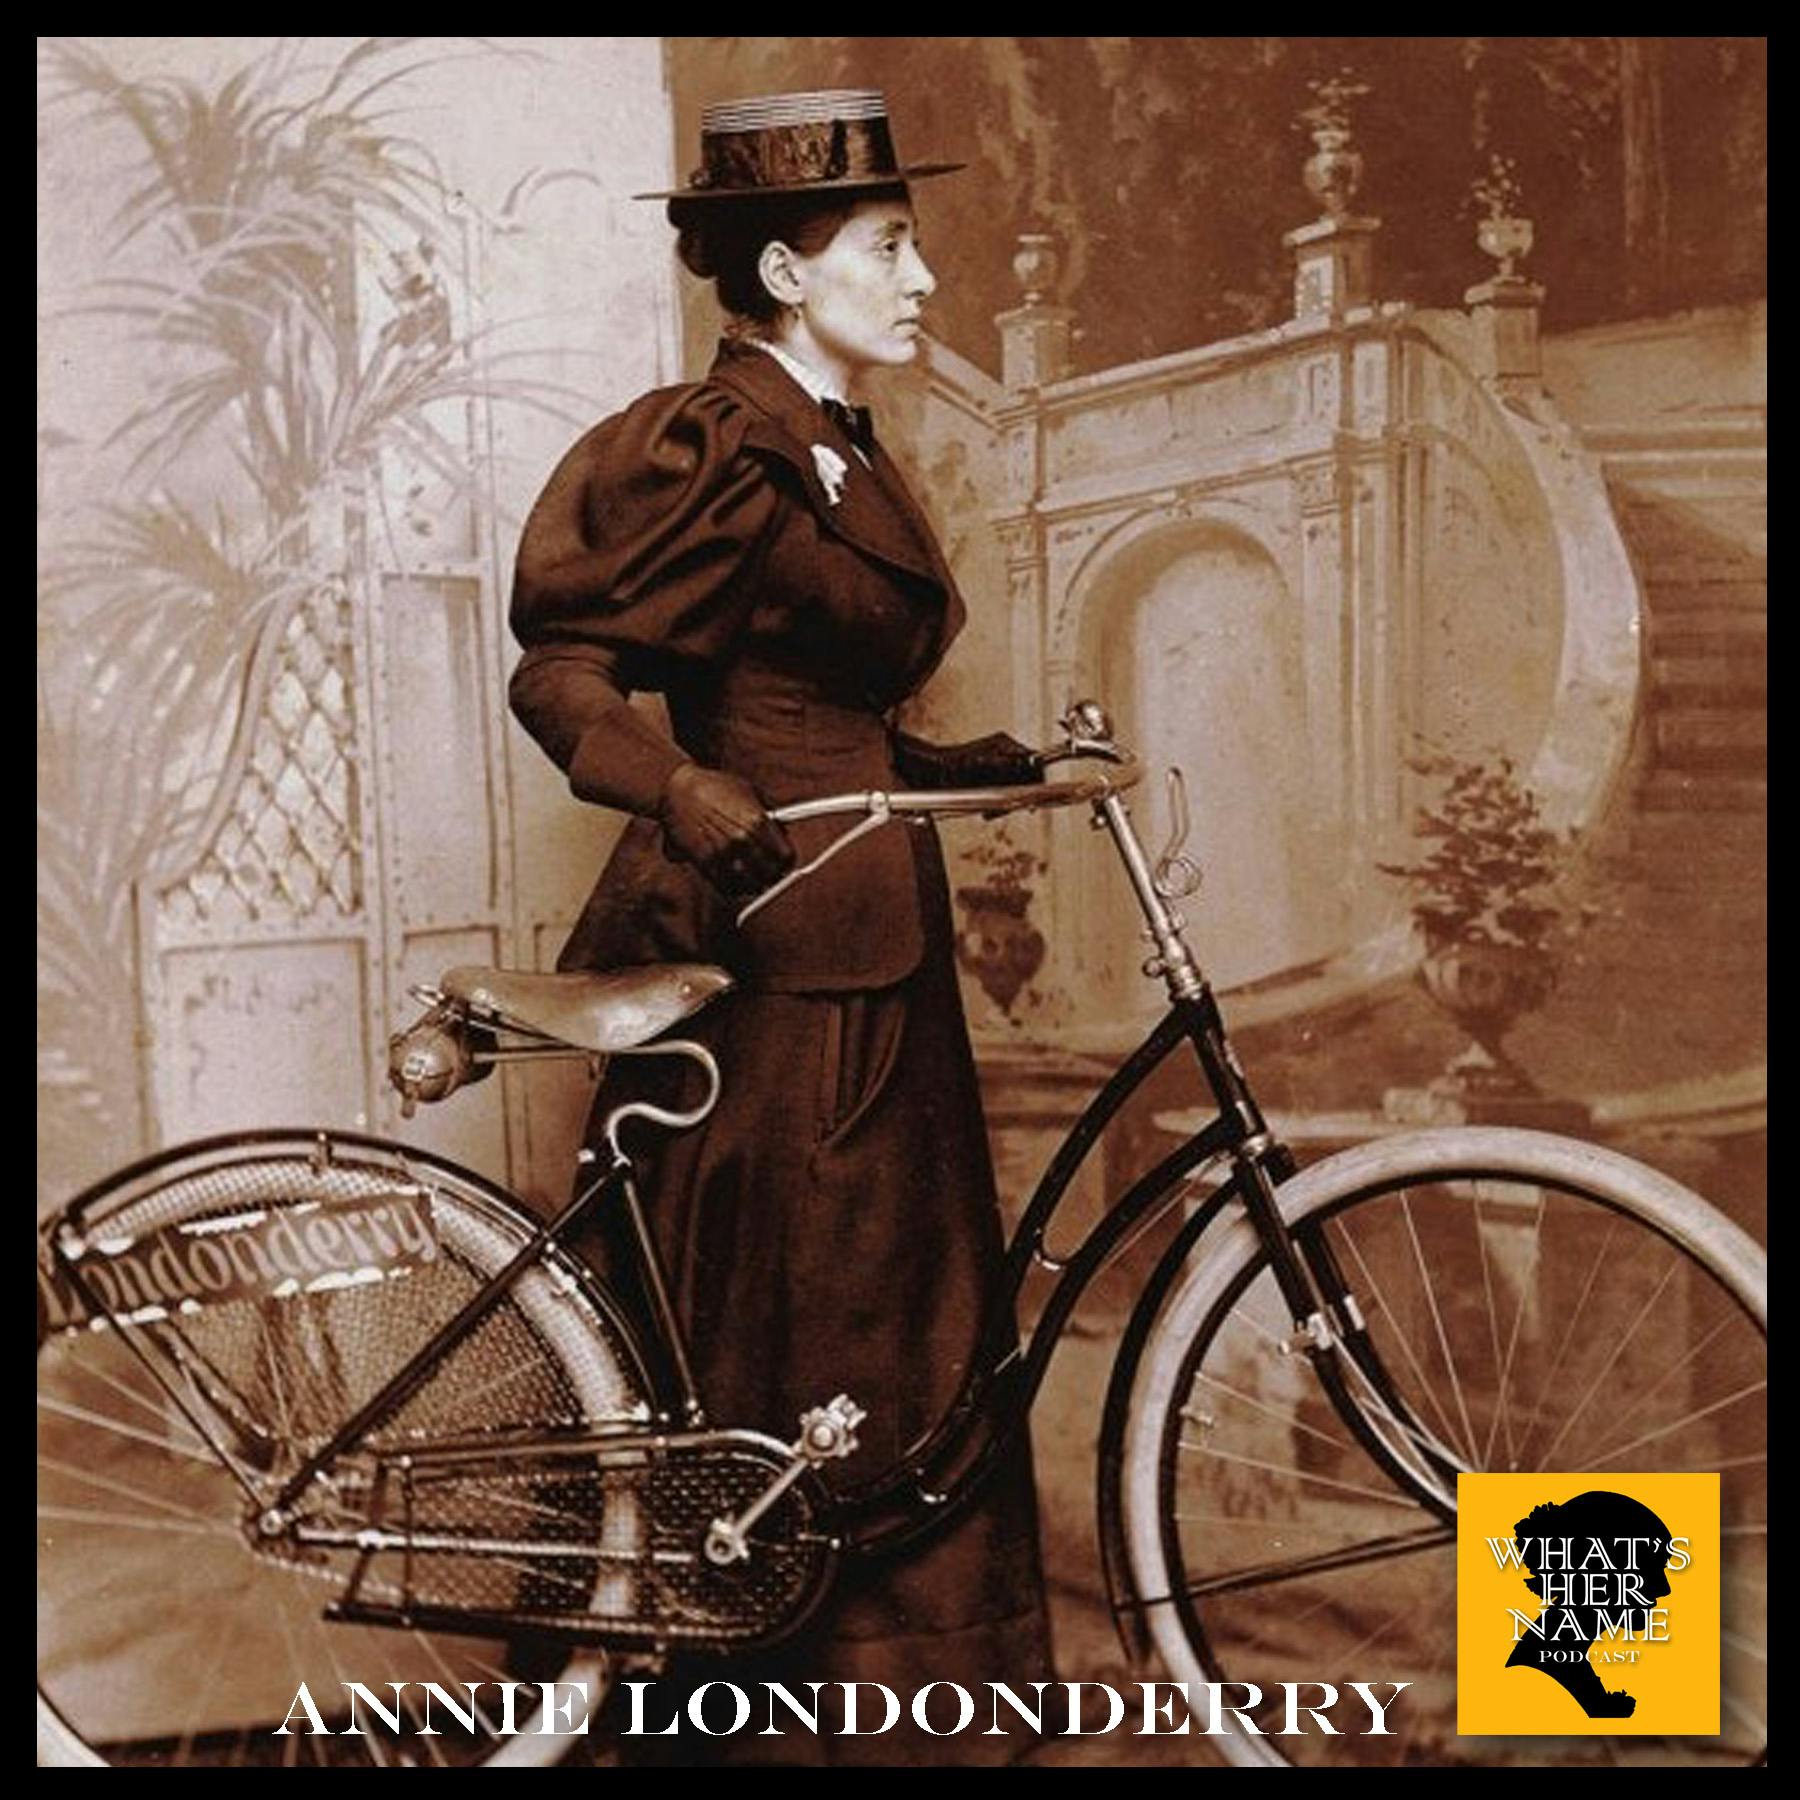 THE ROUND-THE-WORLD CYCLIST Annie Londonderry